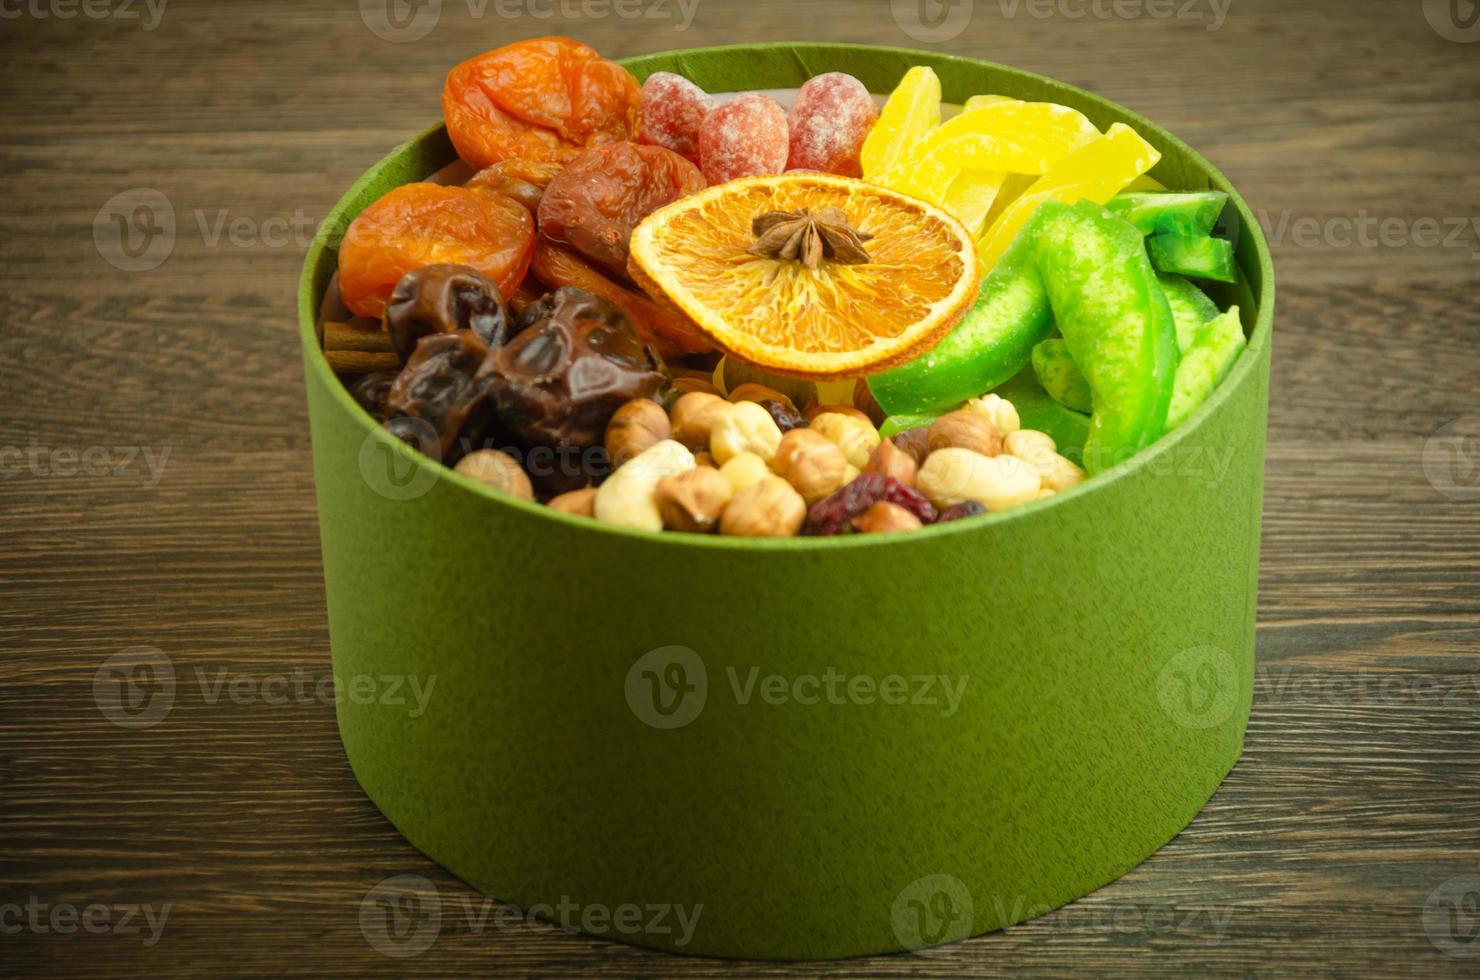 in the box nuts, dried fruits and candied fruits, a useful gift photo